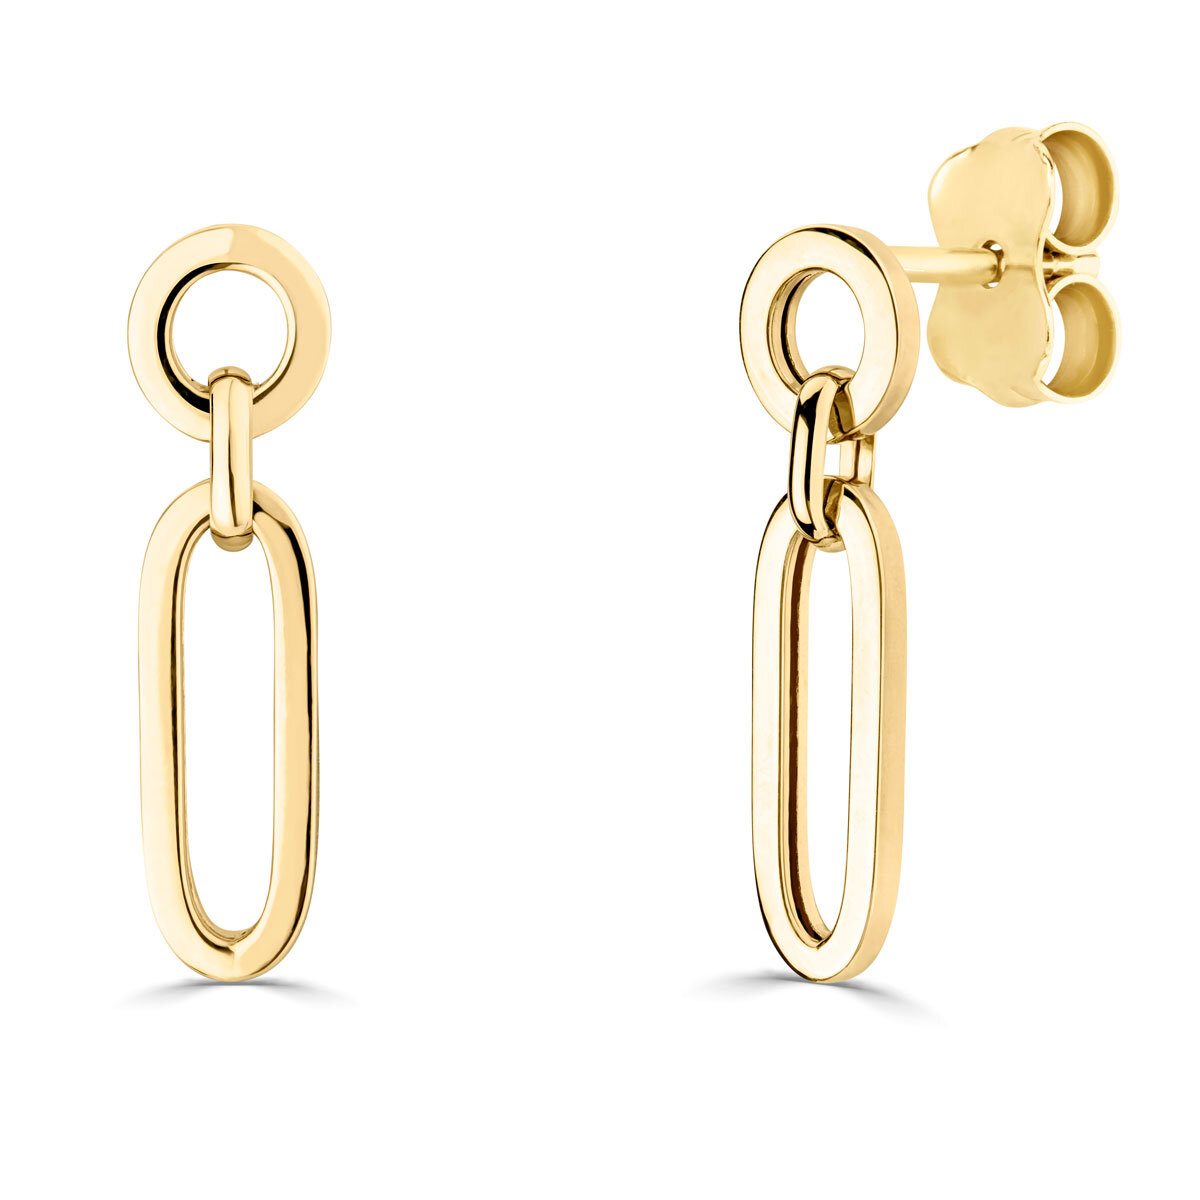 14ct Yellow Gold Paperclip Earrings